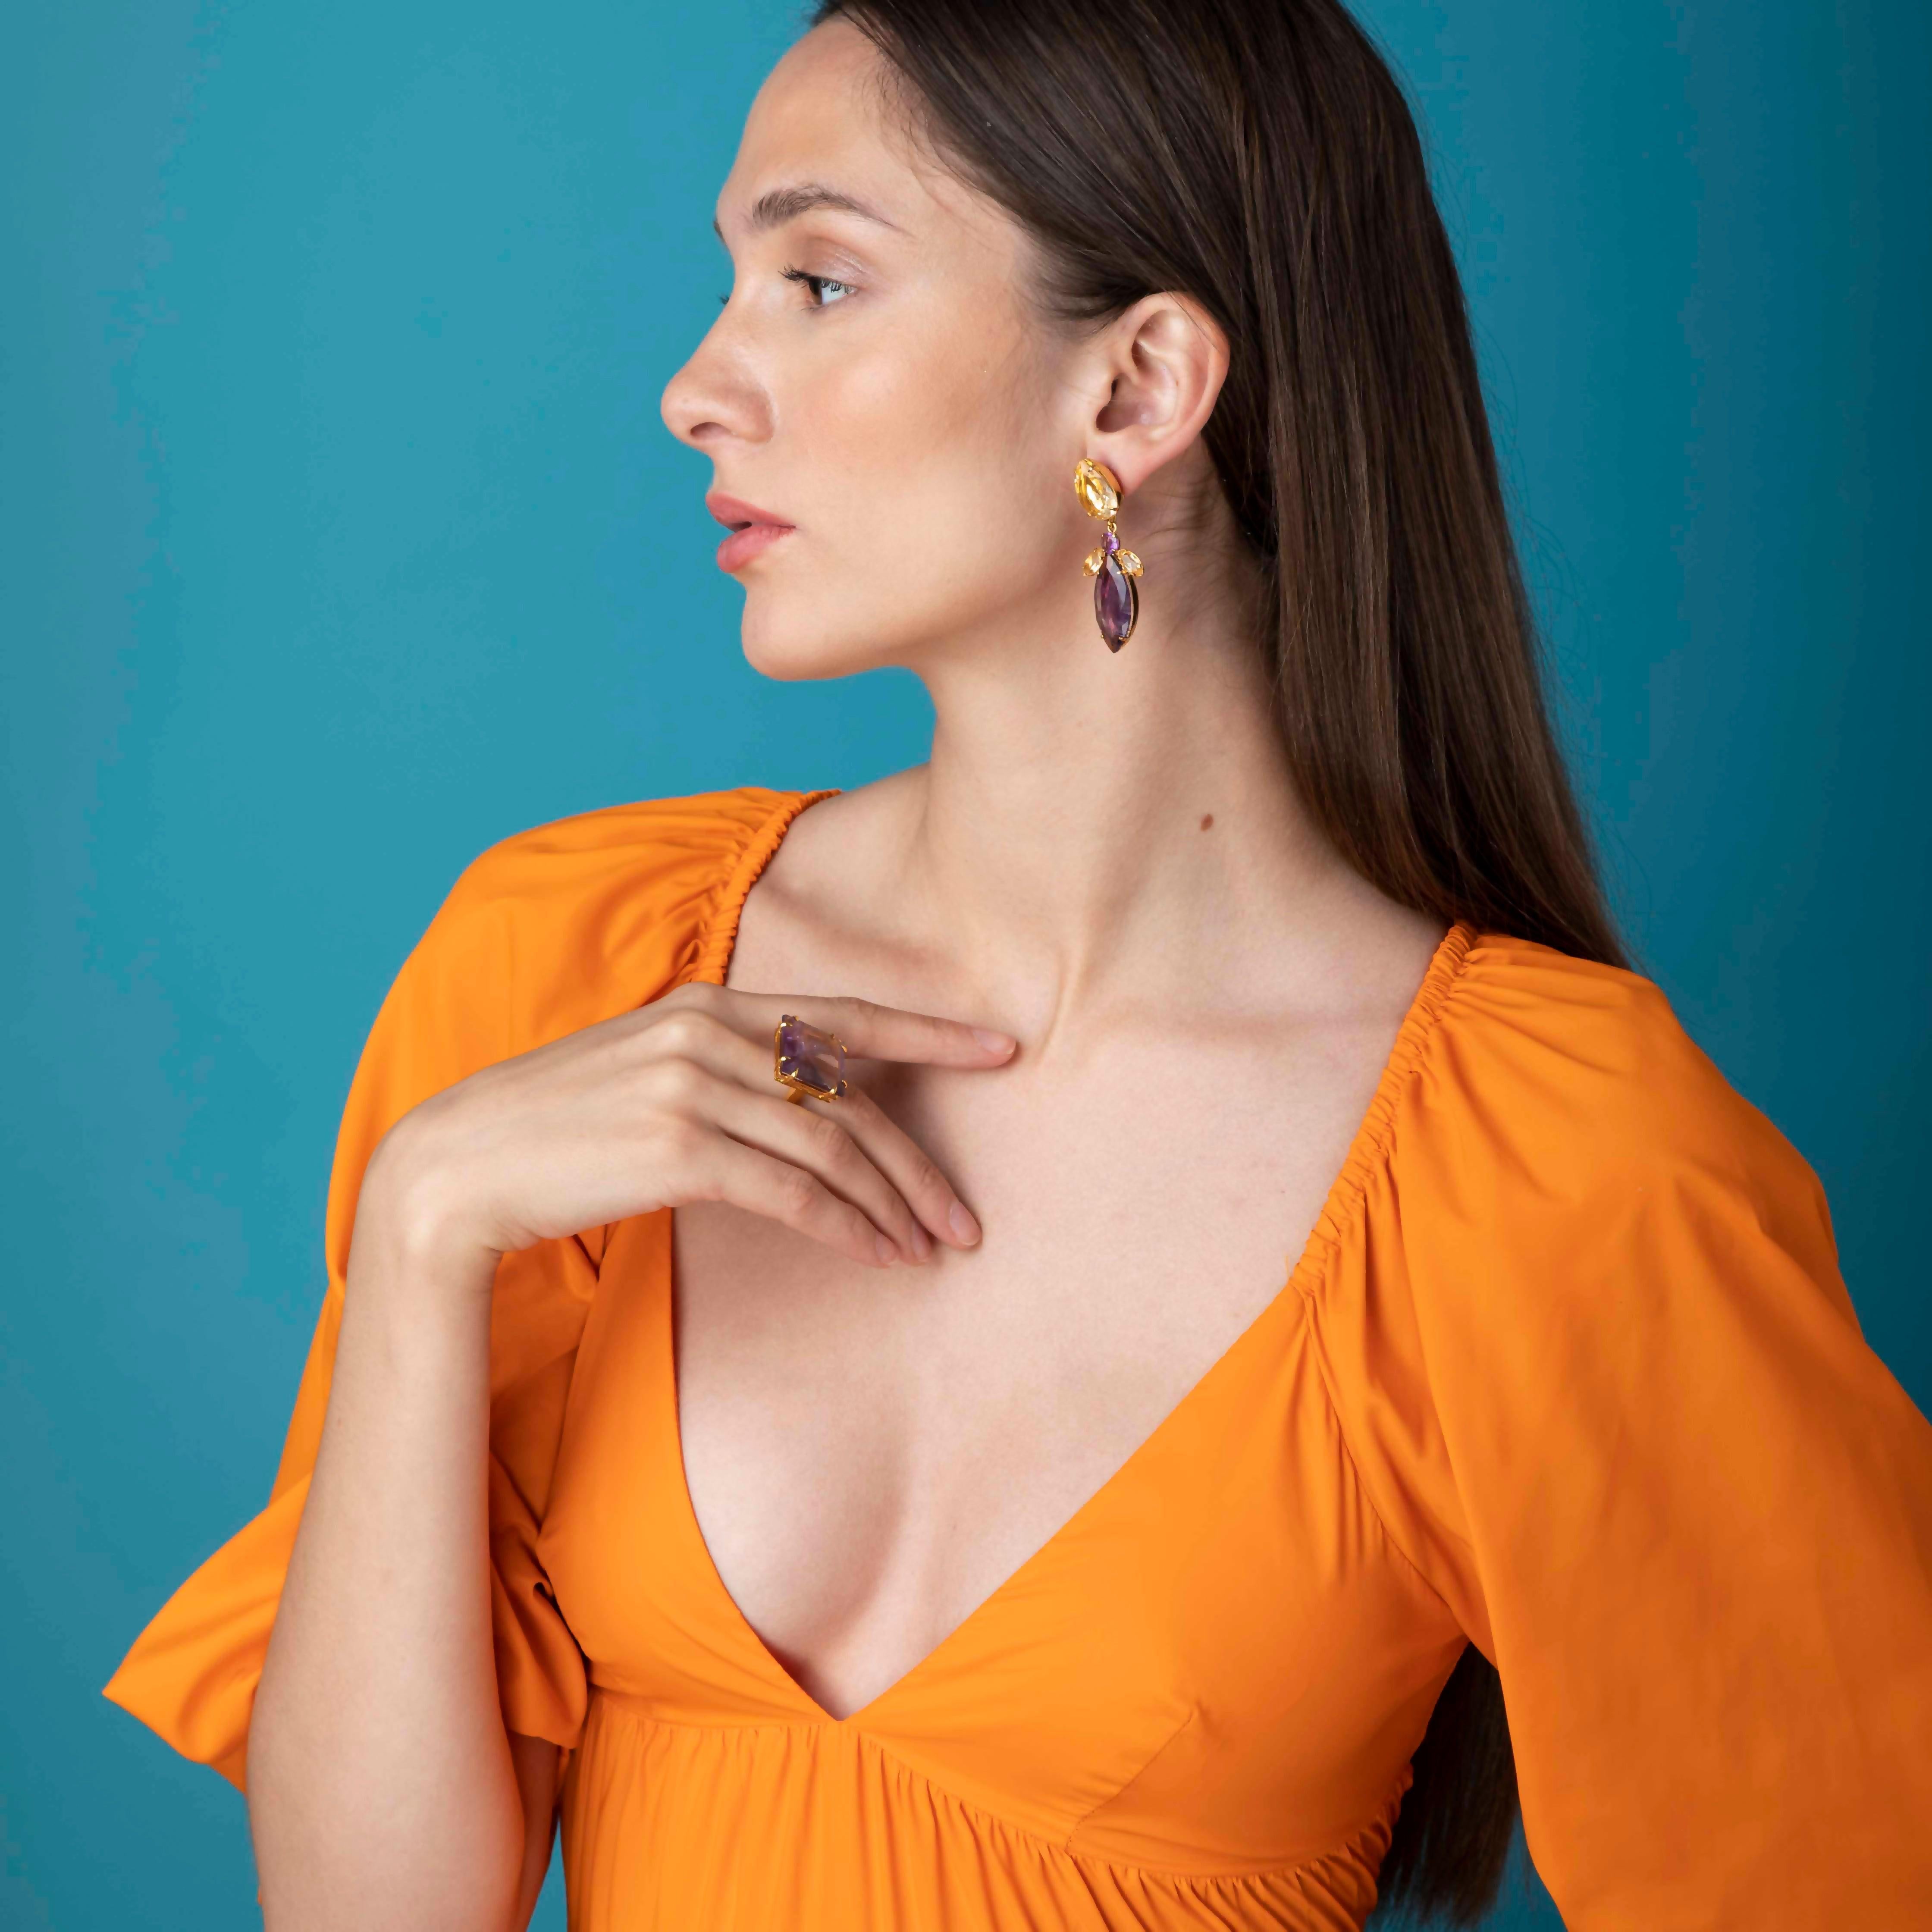 The Shannon Earrings, crafted from semi-precious stones, offer a versatile removable bottom, enabling a more understated style. Their vintage, timeless design harmonizes with a fresh array of color palettes, exuding enduring elegance.

Stones: Lemon